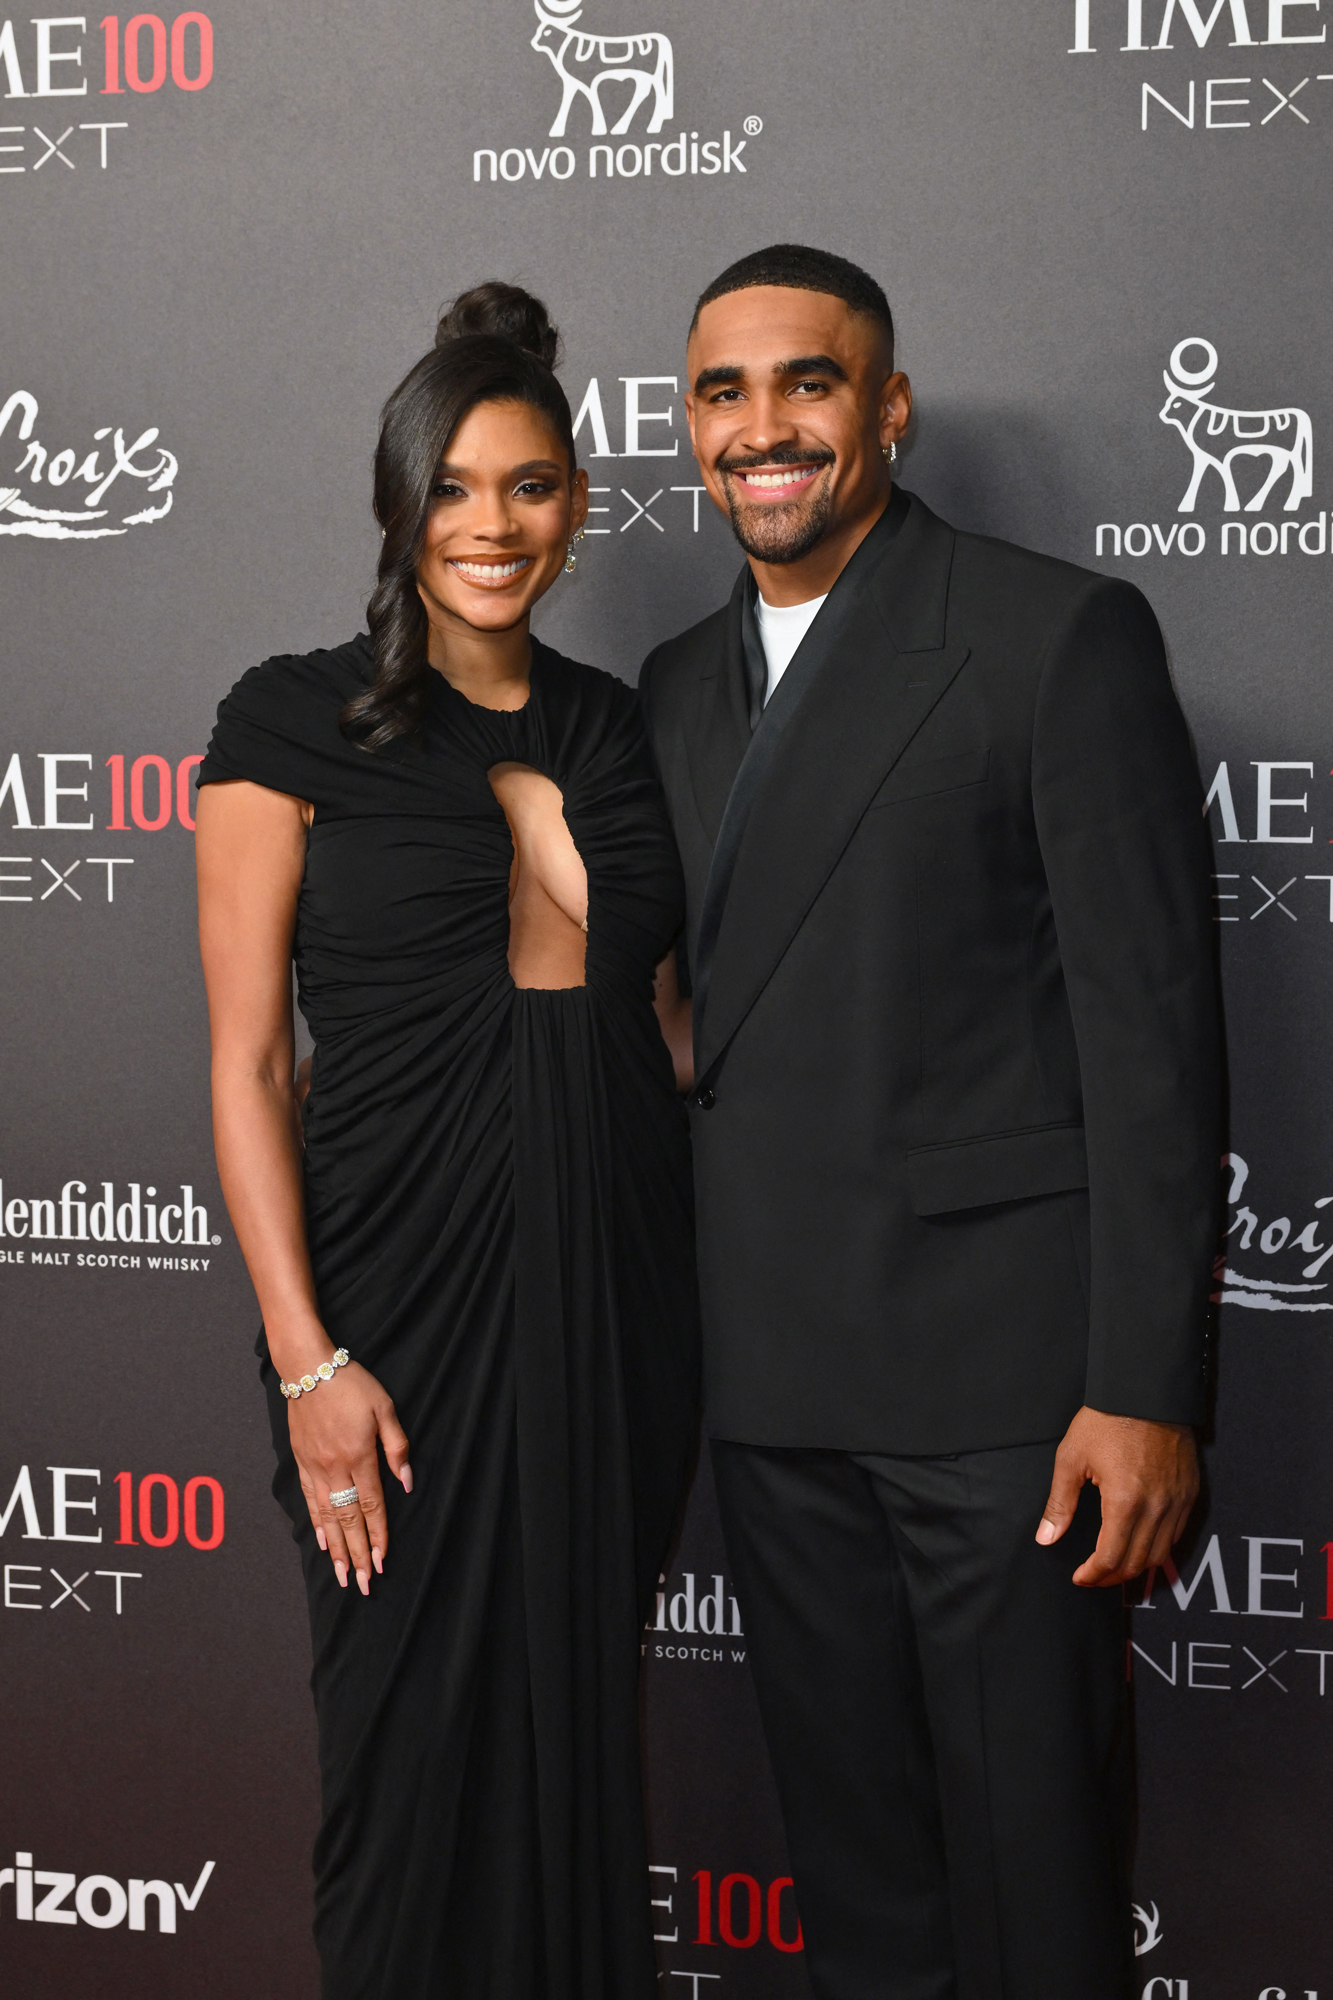 Eagles' Jalen Hurts Steps Out With Girlfriend Bry Burrows at NYC Gala